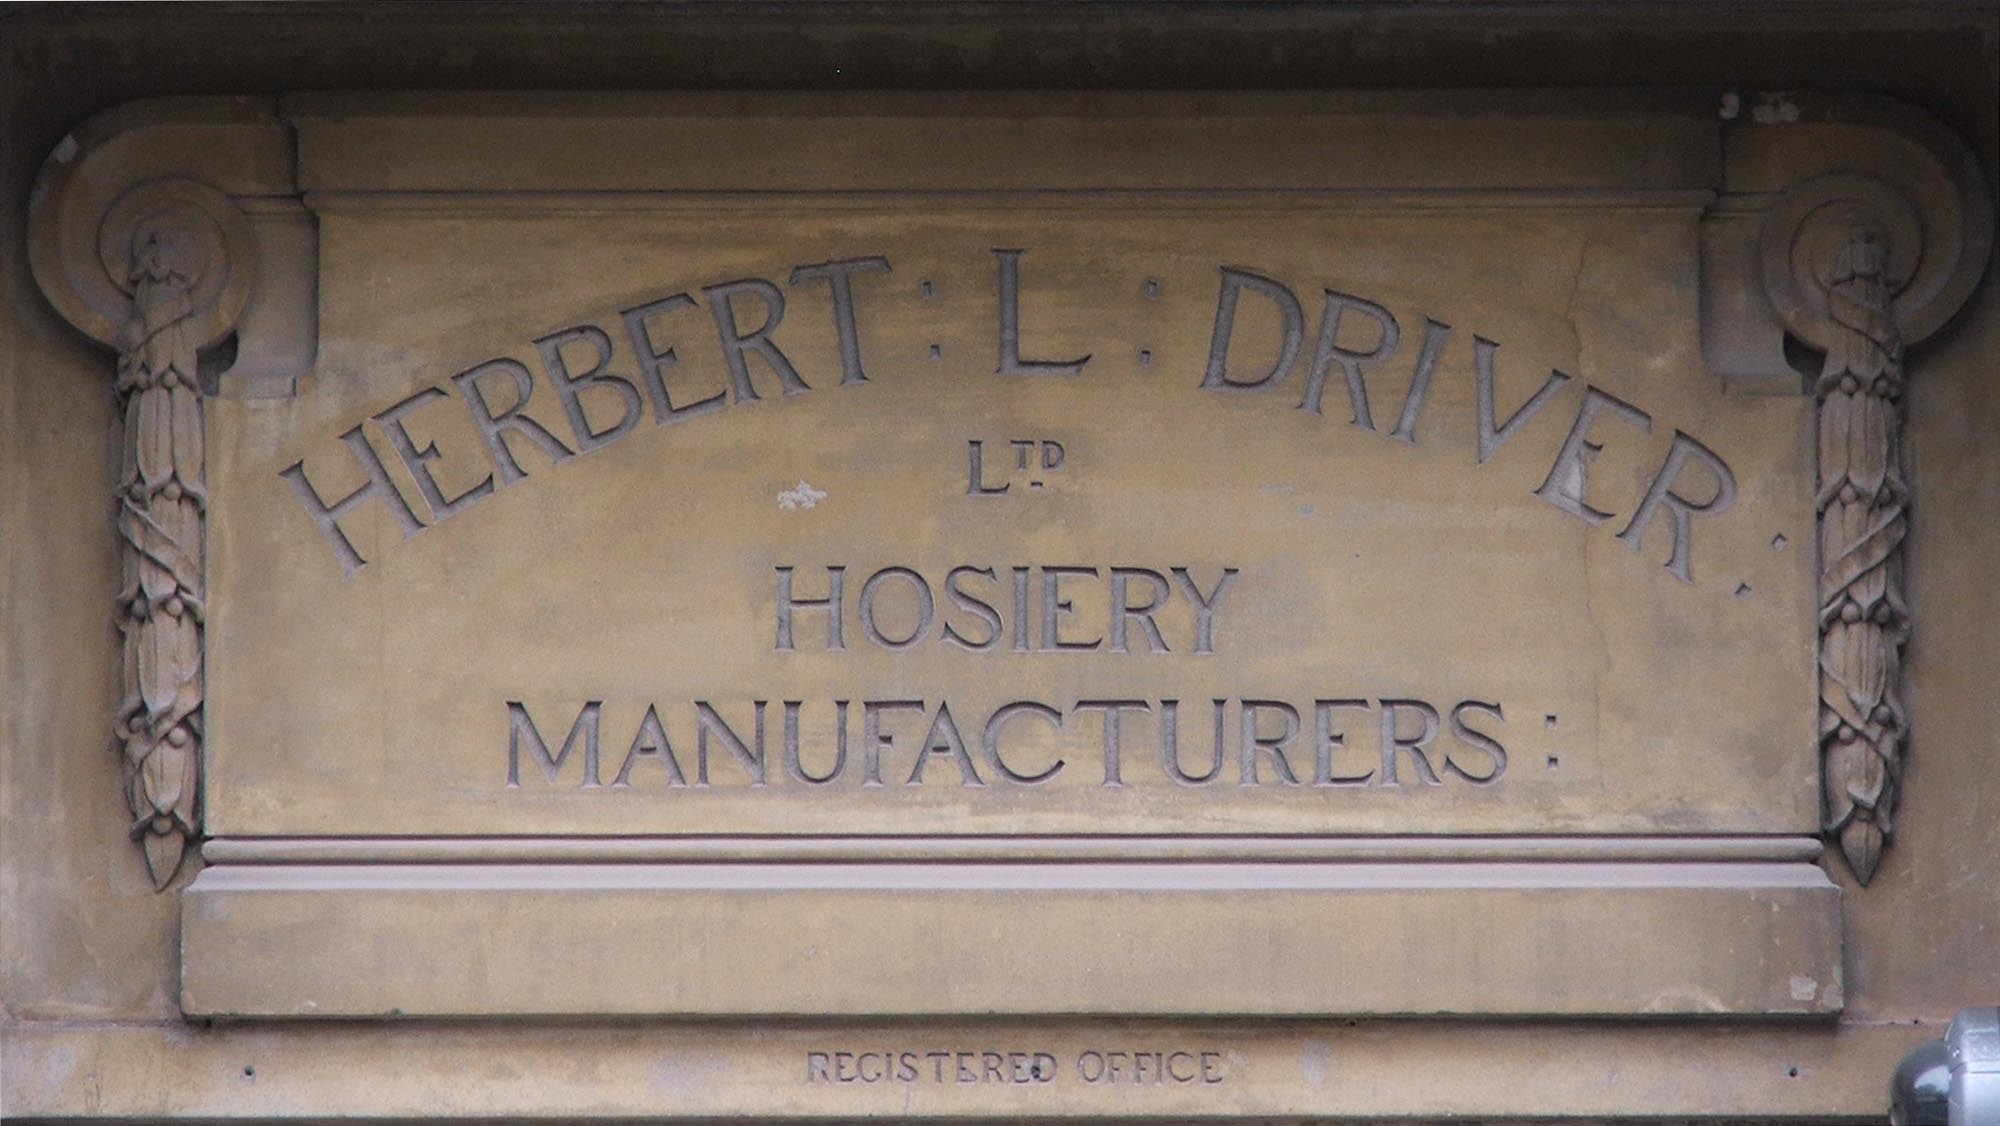 A carved sign for Herbert L.Driver Hosiery Manufactures Ltd. on King Street - Colin Hyde